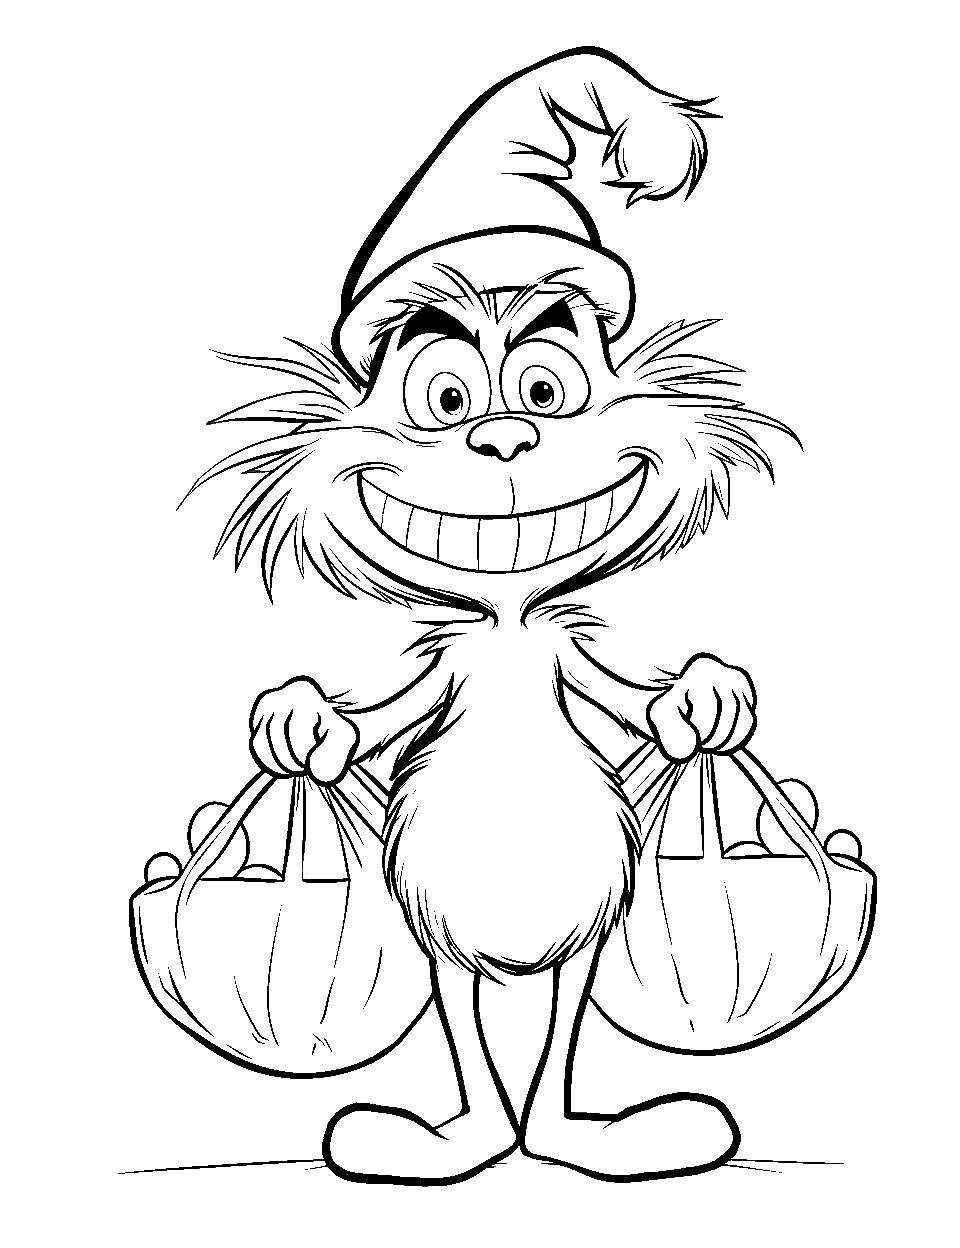 Candy Bag Holding Coloring Page - The Grinch is holding a bag filled with candy.